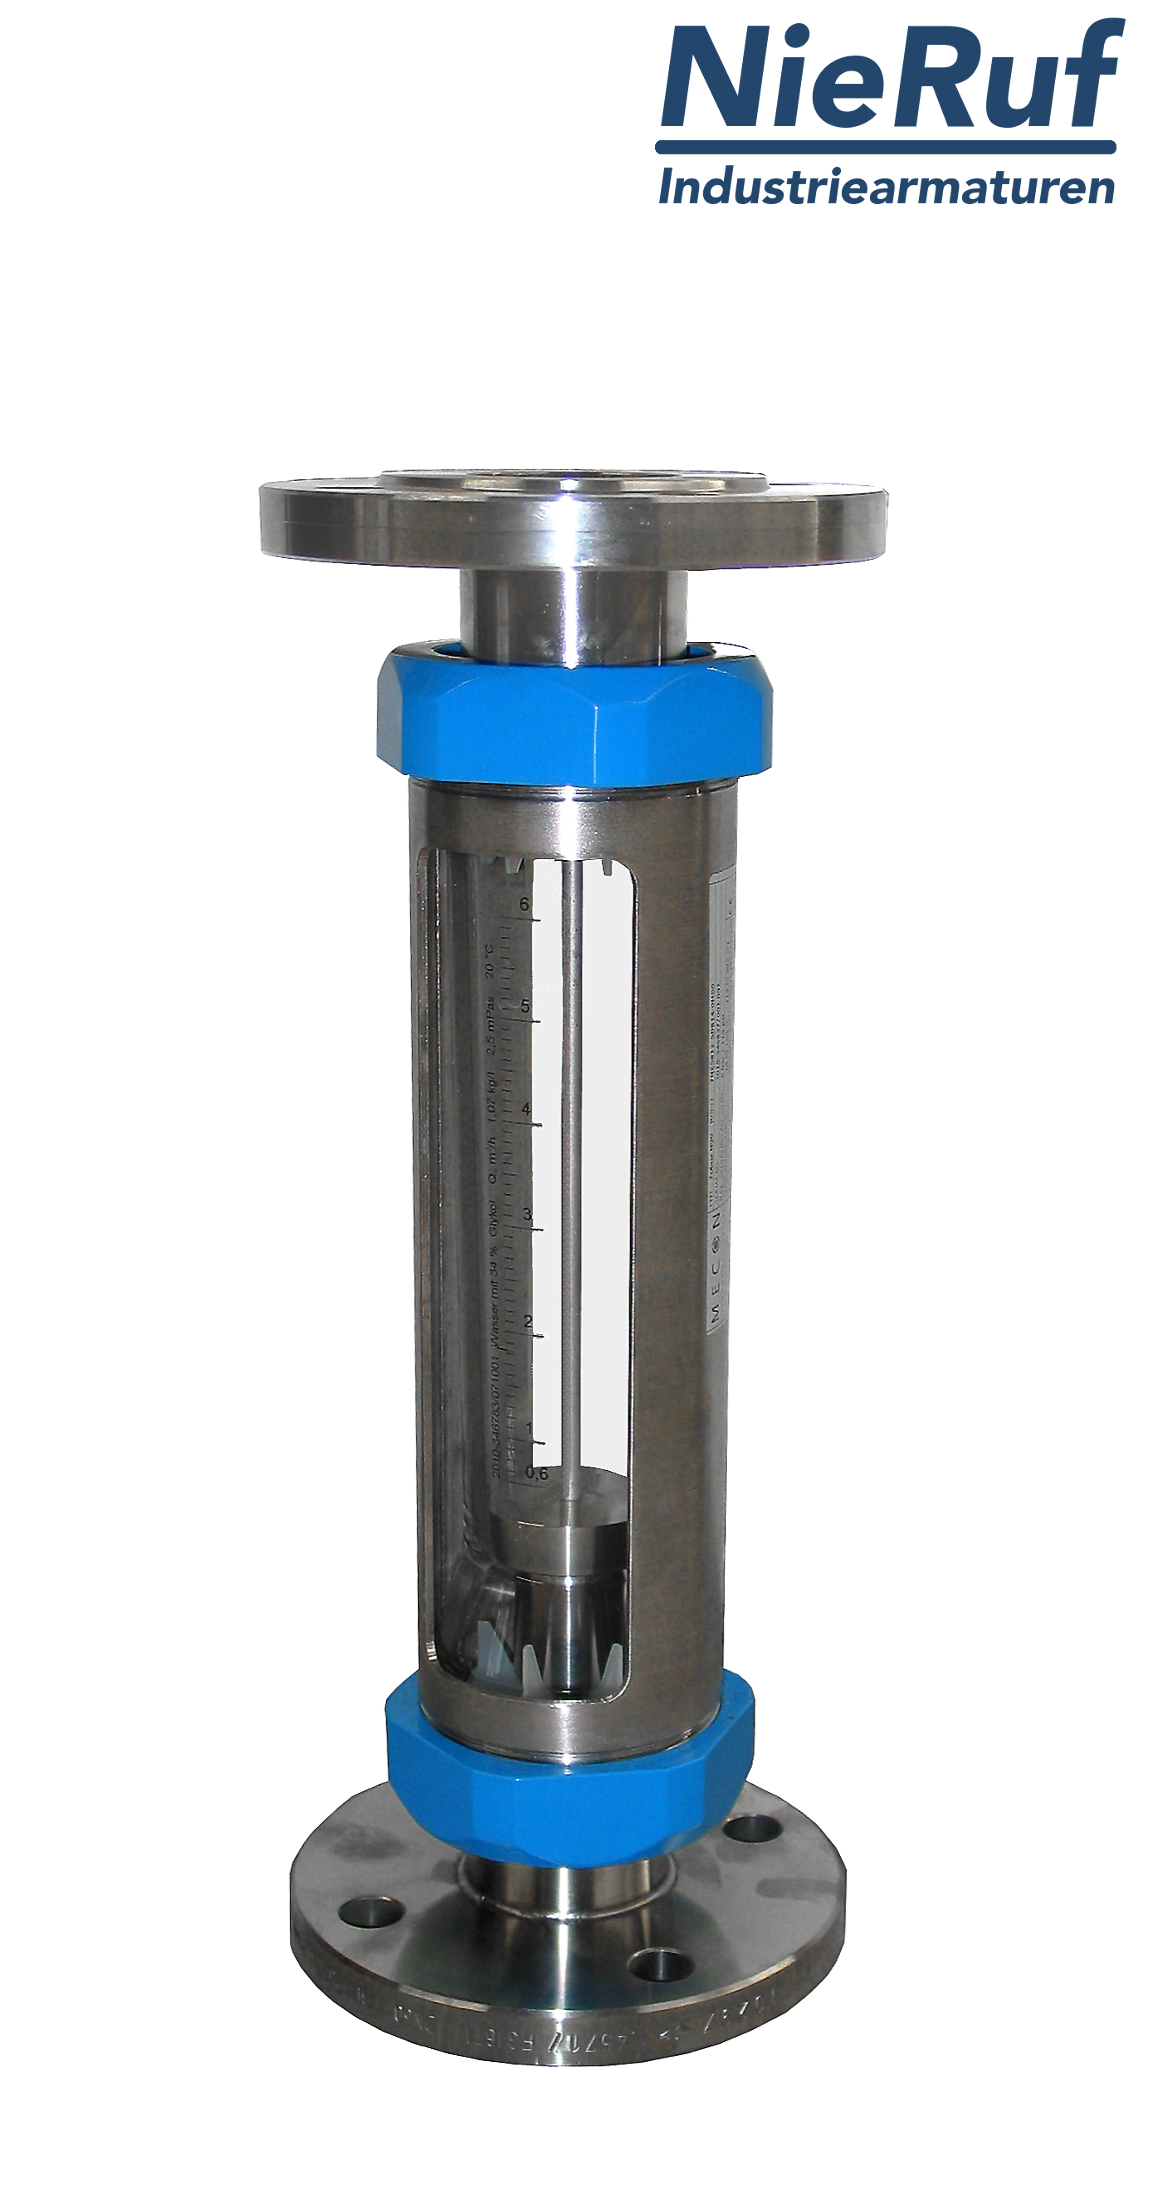 Variable area flowmeter stainless steel + borosilicate flange DN65 1000.0 - 10000 l/h water FKM